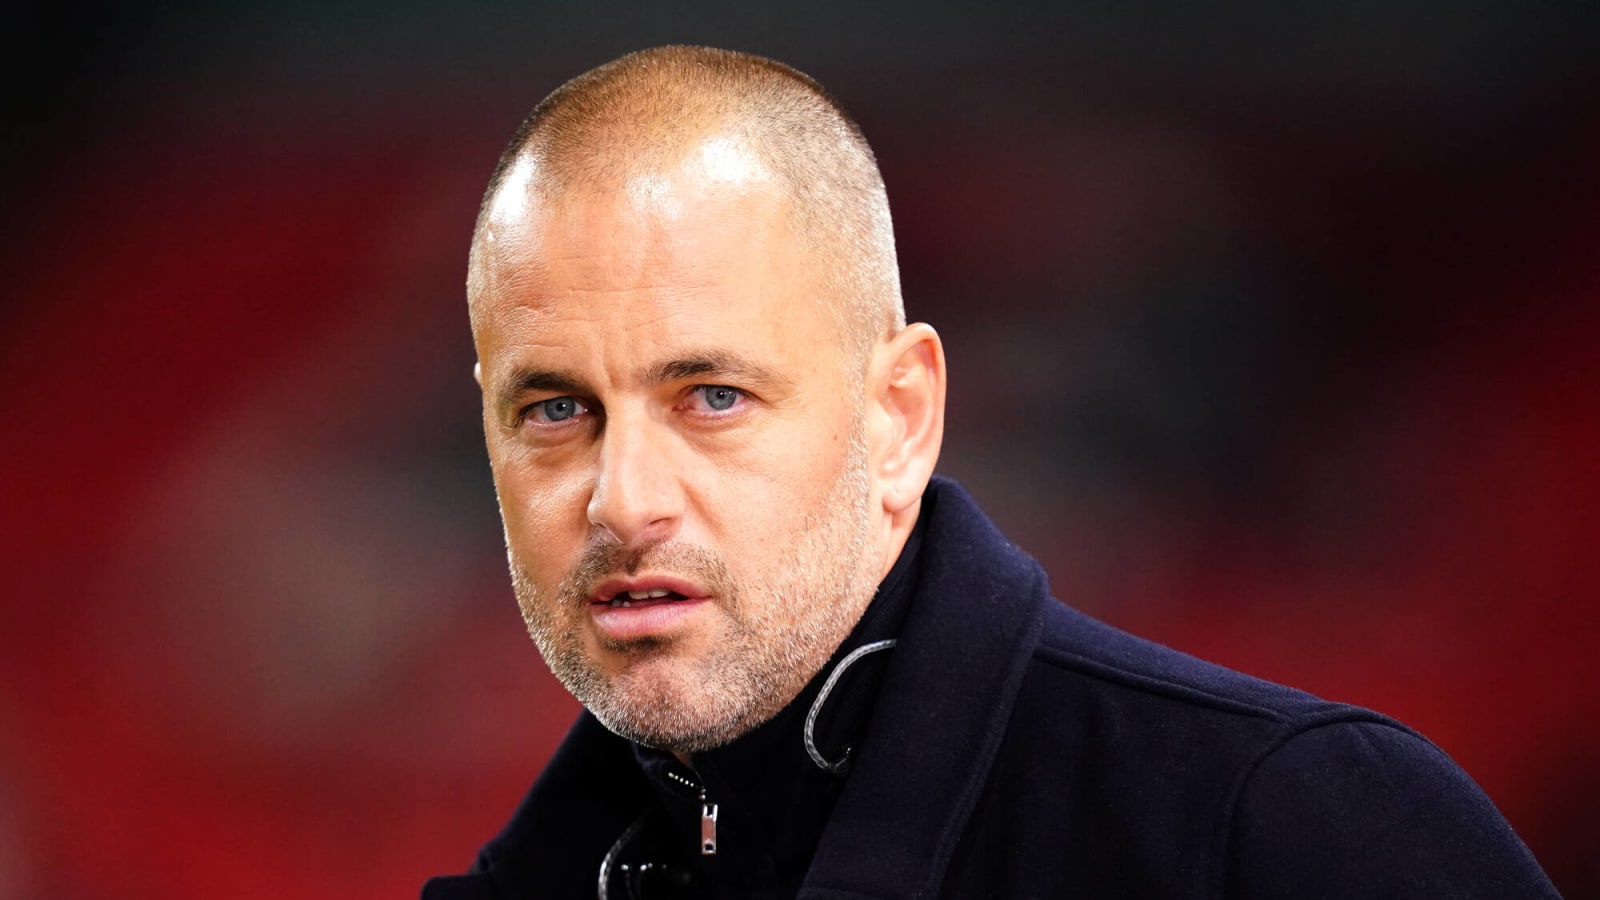 'Something wrong fundamentally' – Joe Cole blasts Chelsea asking ‘what is wrong with this club?’